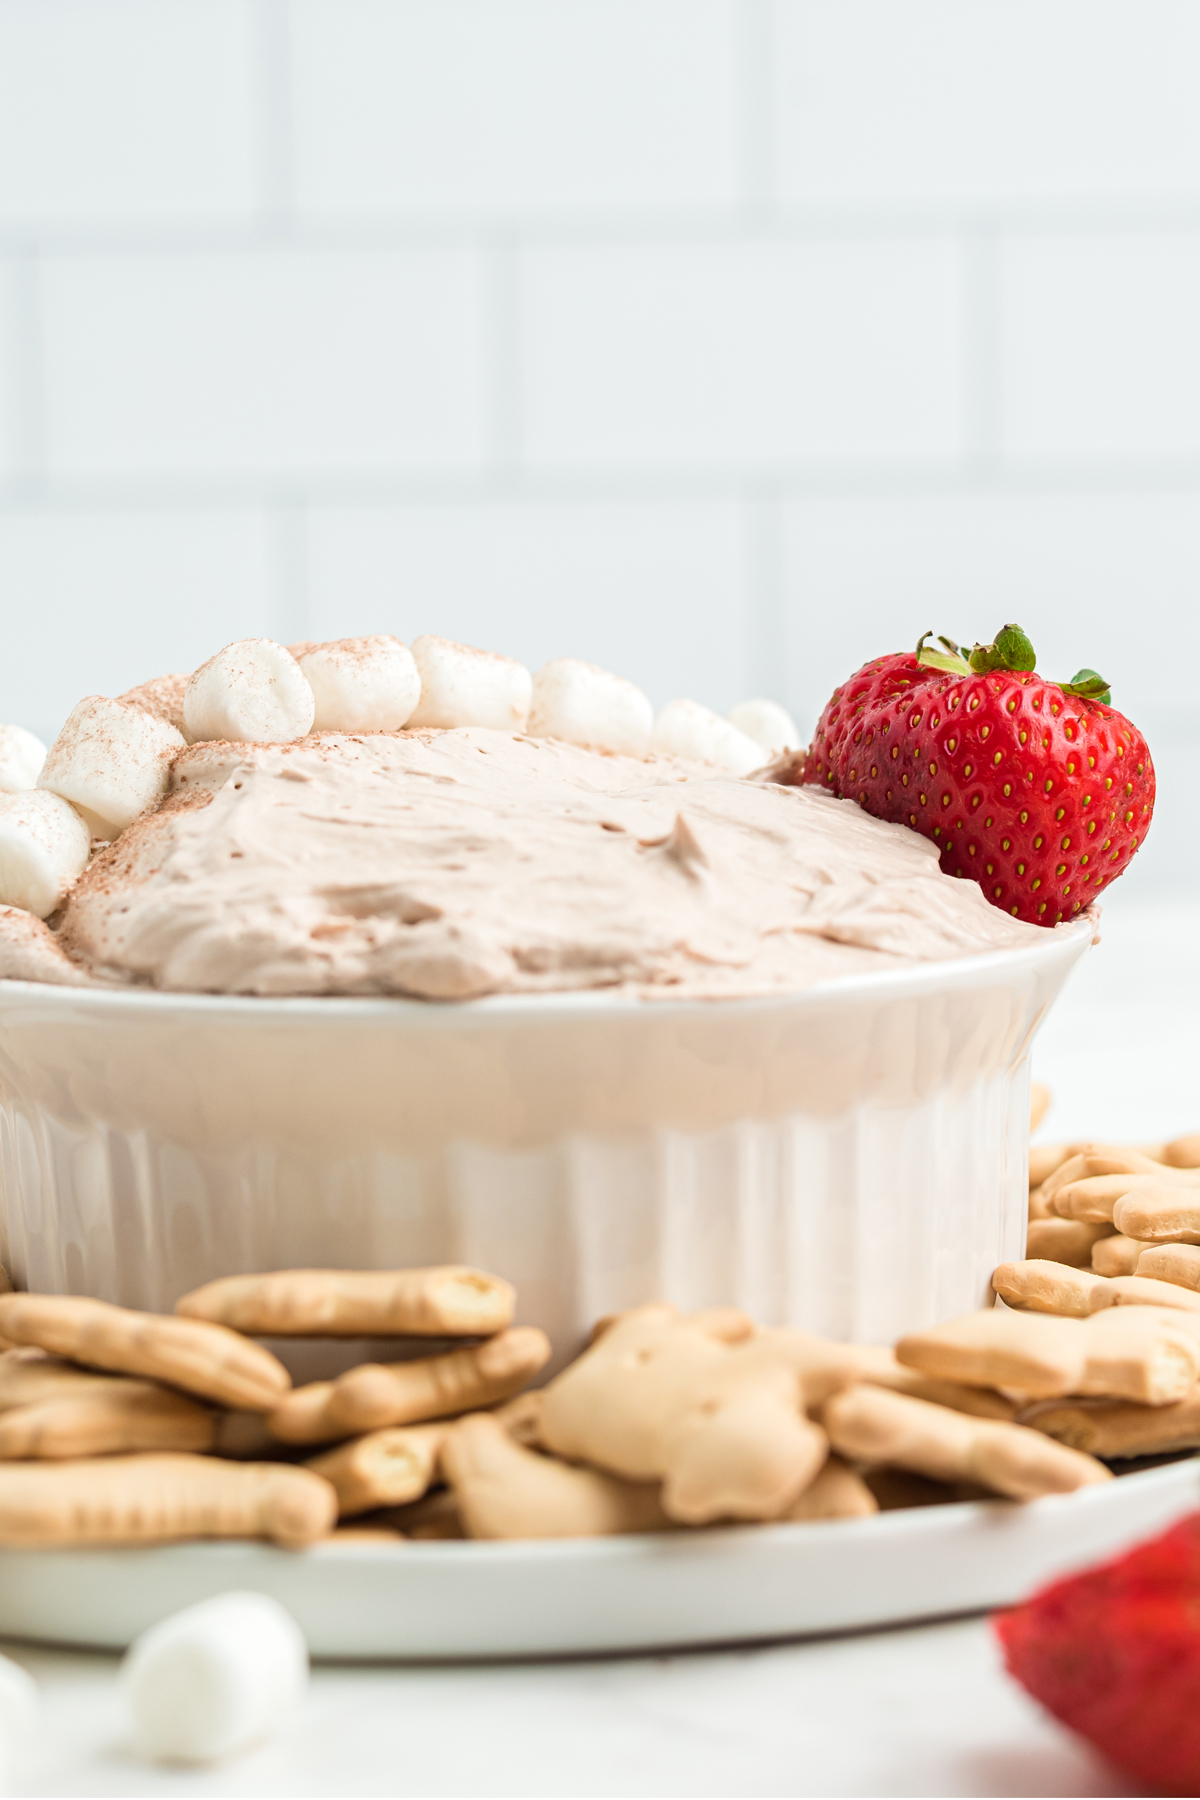 Hot chocolate dip on a ramekin with garnishes or strawberries, mini marshmallows, and biscuits